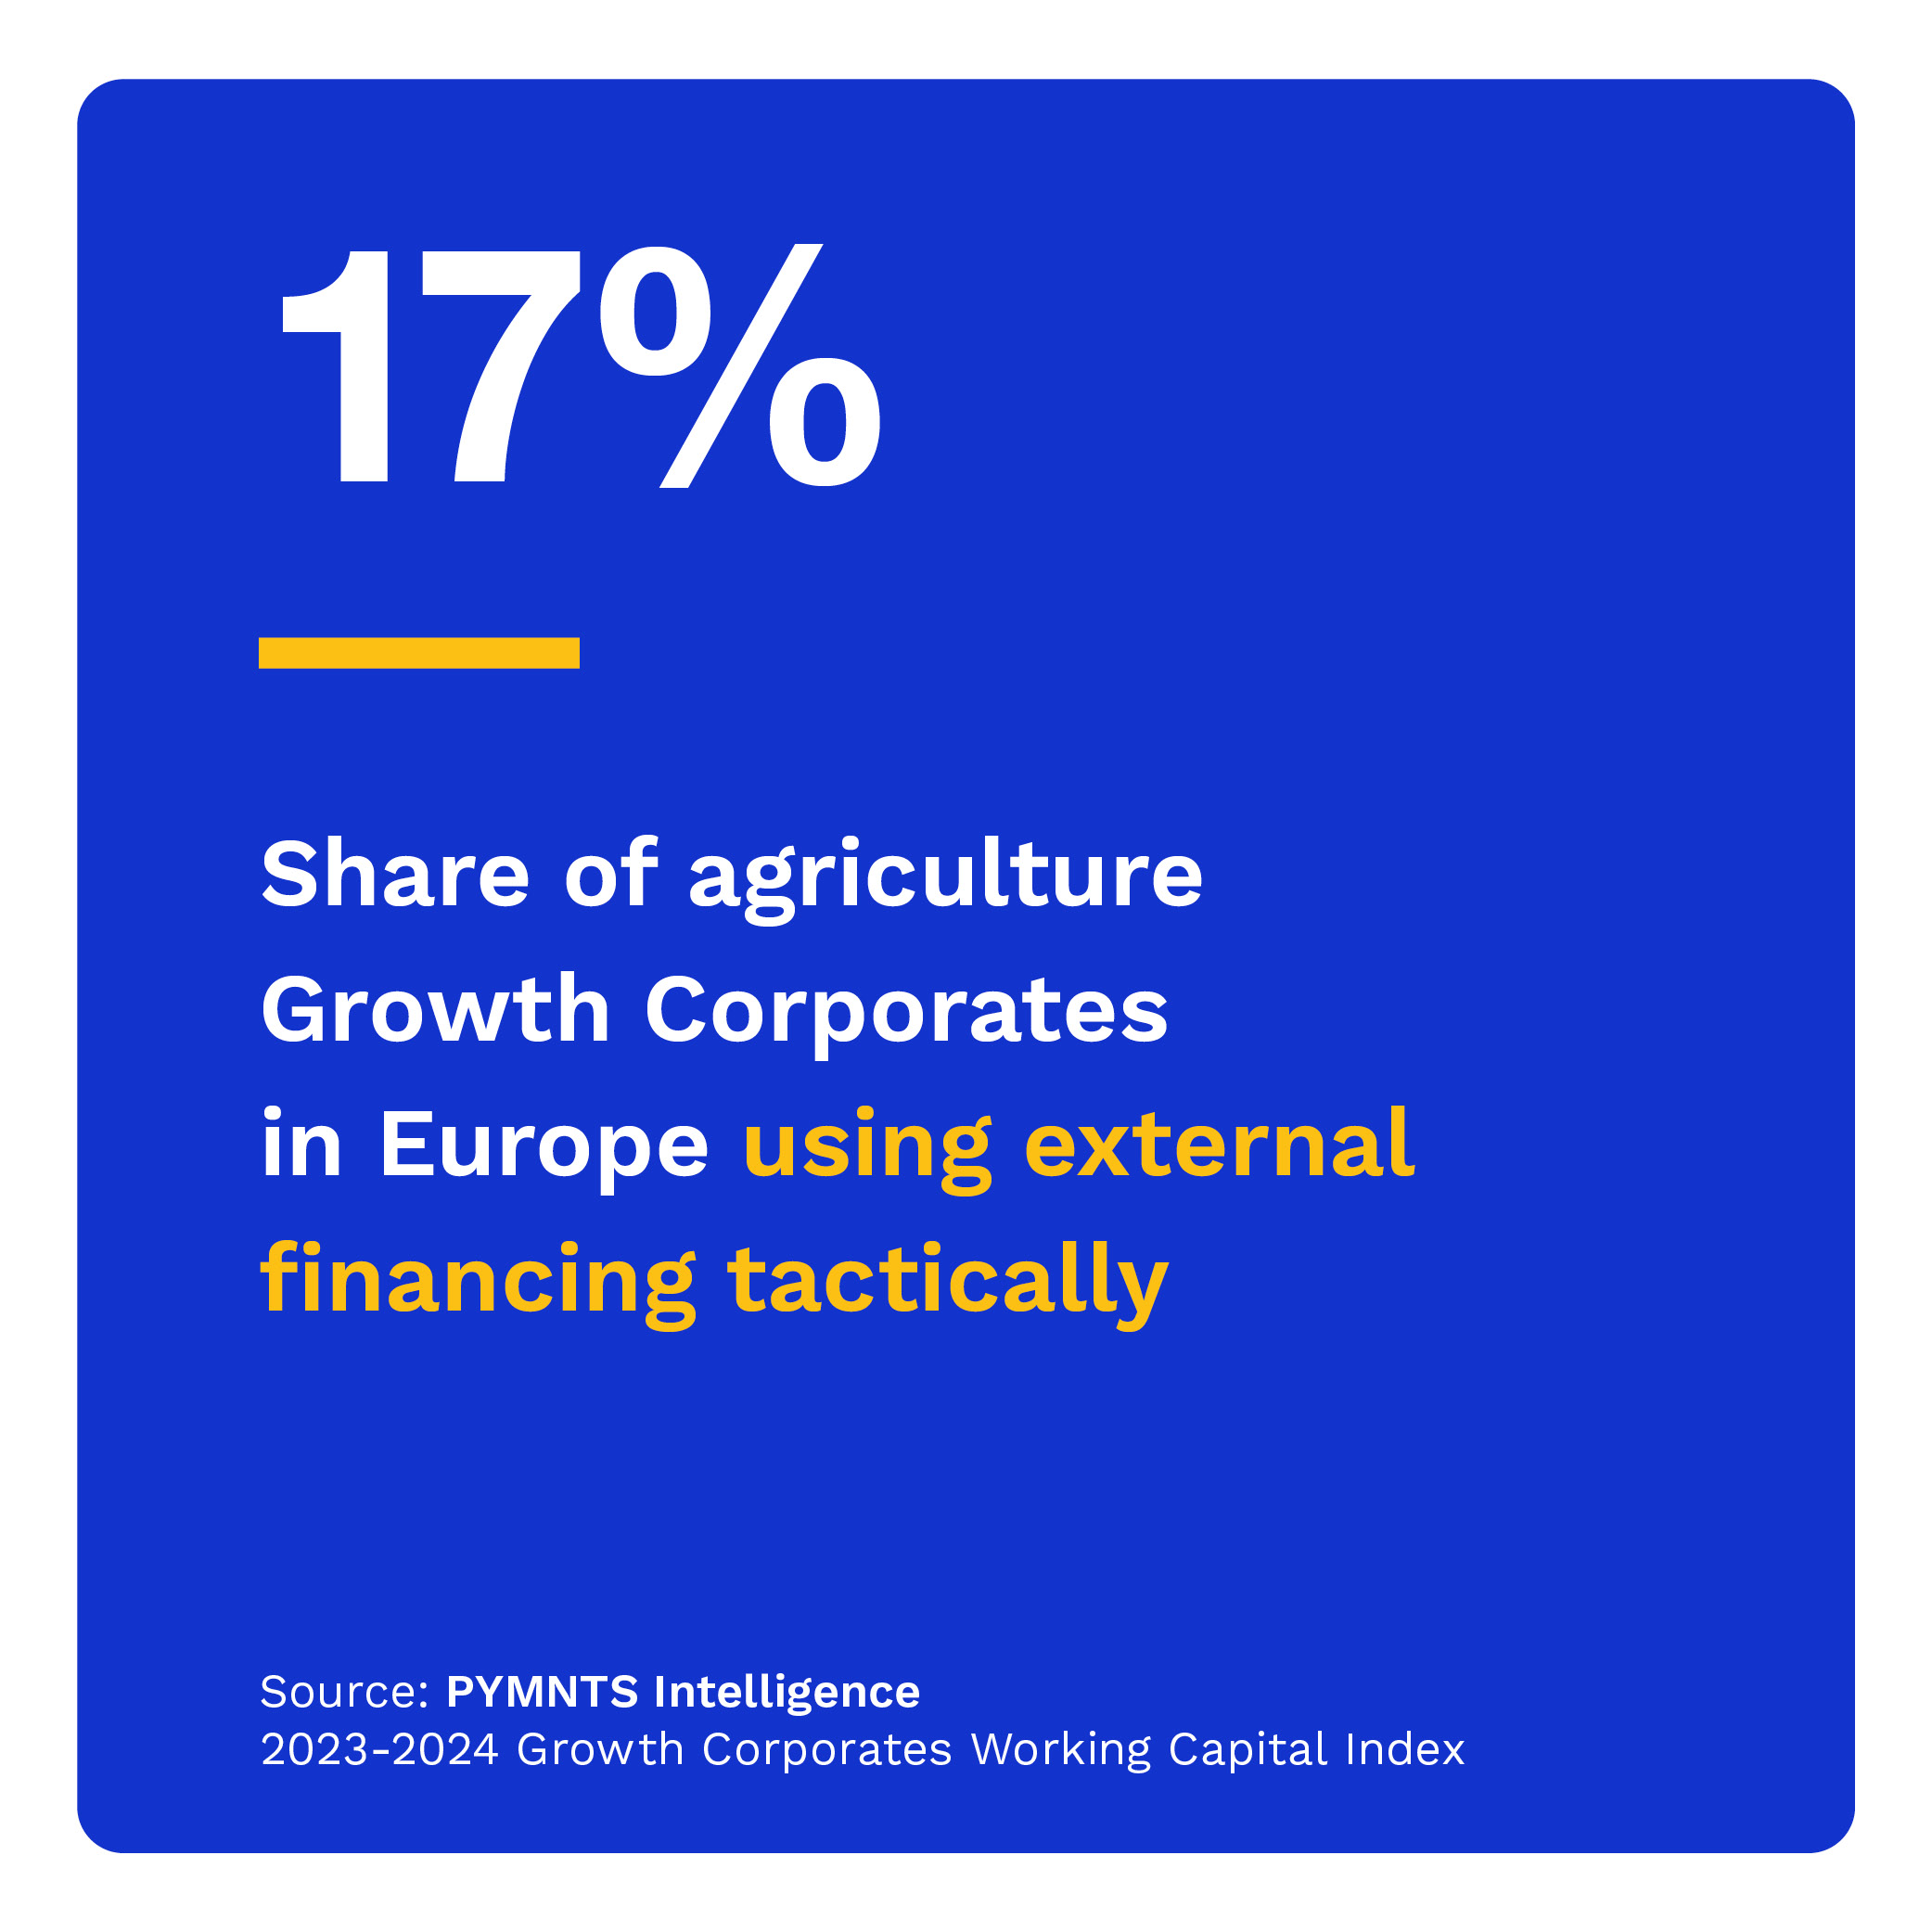 17%: Share of agriculture Growth Corporates in Europe using external financing tactically